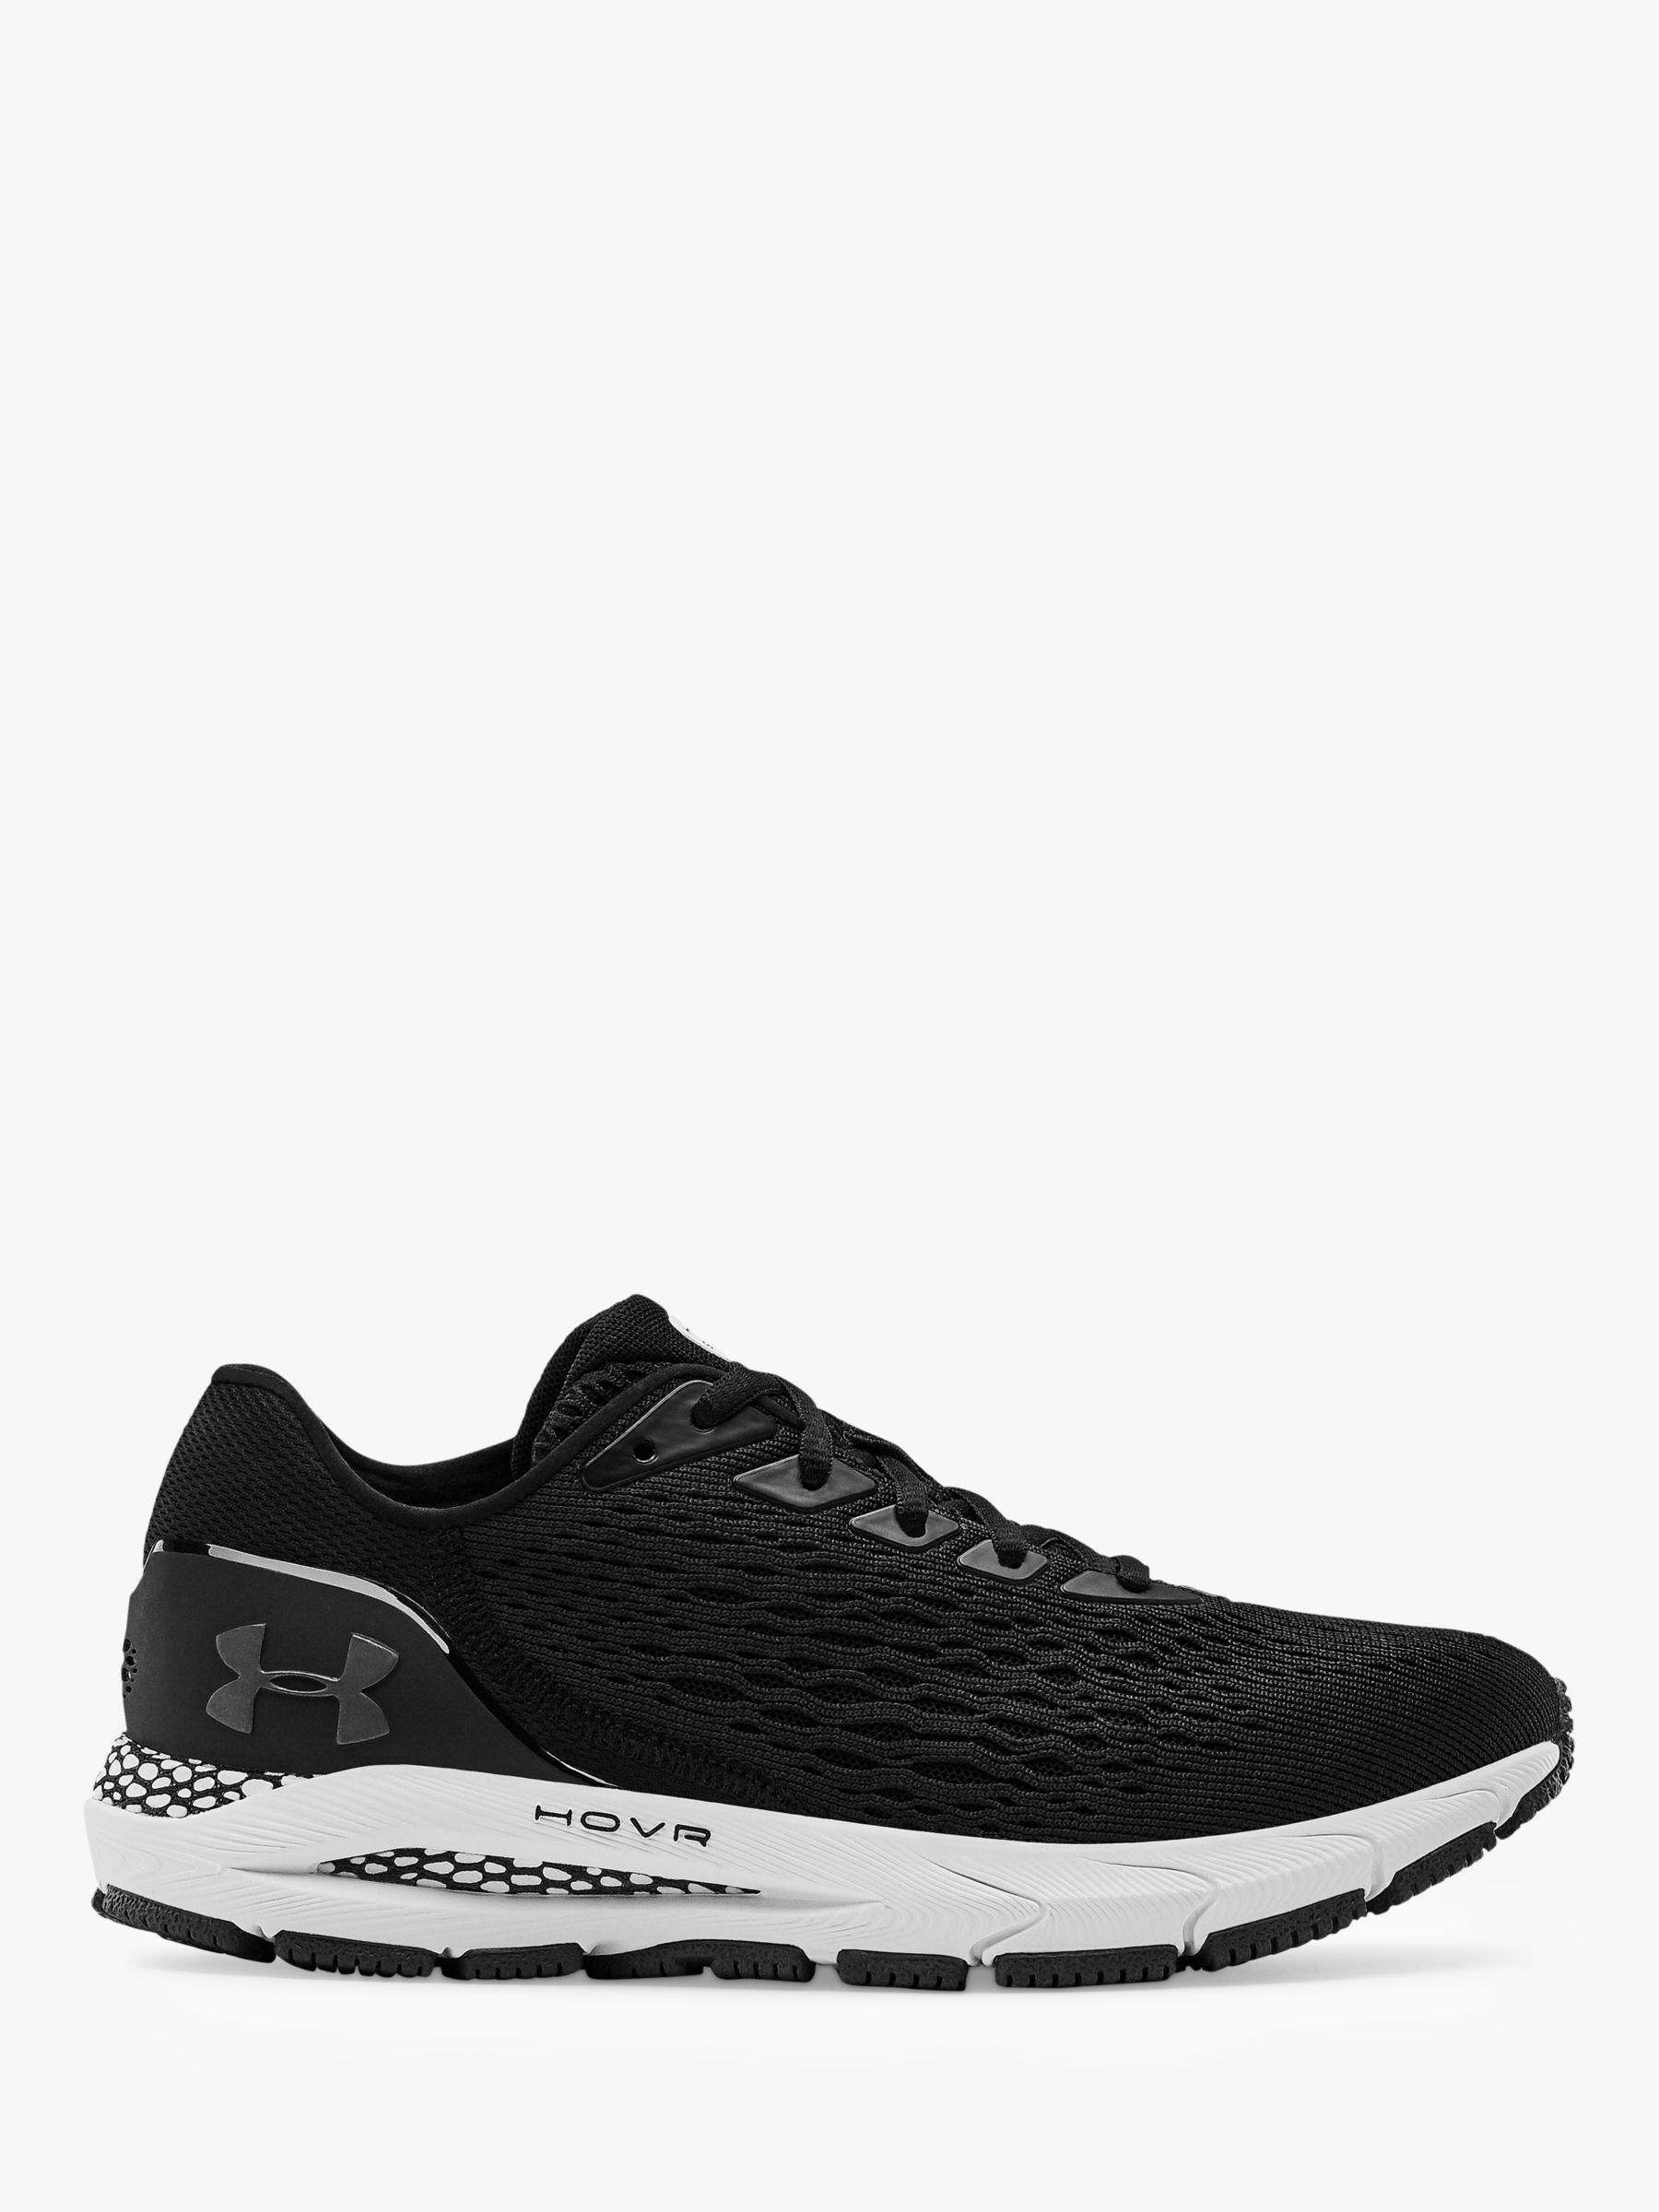 Under Armour HOVR Sonic 3 Women's 